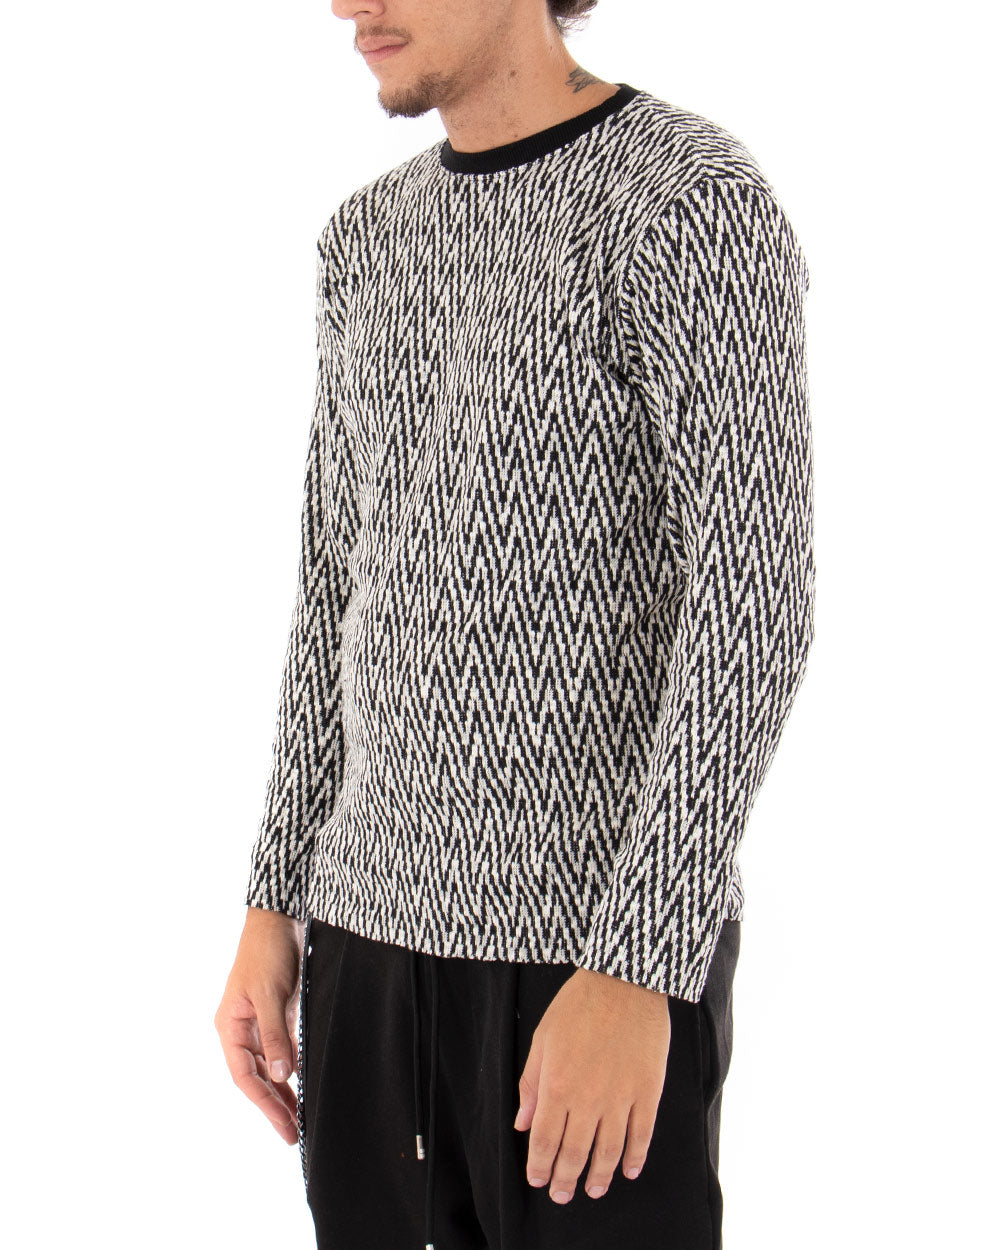 Men's Long Sleeves Multicolored Perforated Crew Neck Sweater GIOSAL